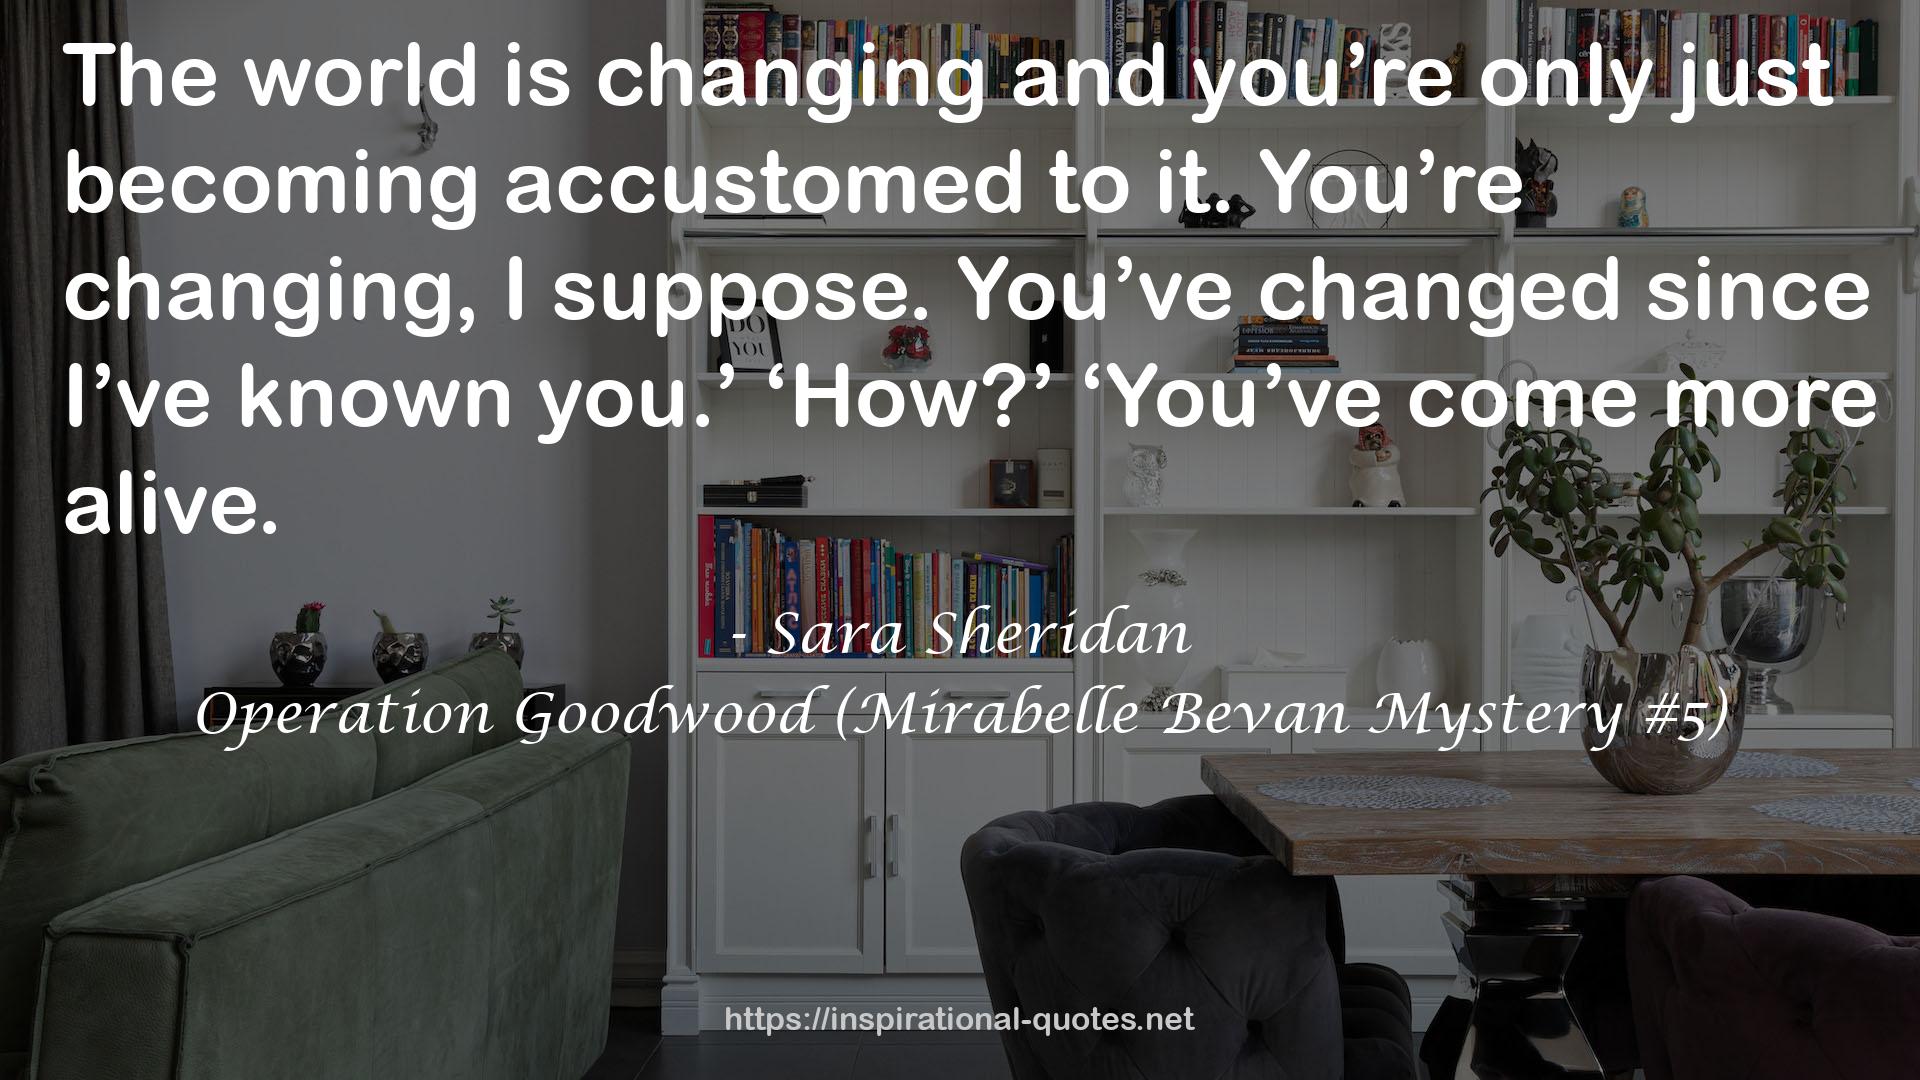 Operation Goodwood (Mirabelle Bevan Mystery #5) QUOTES